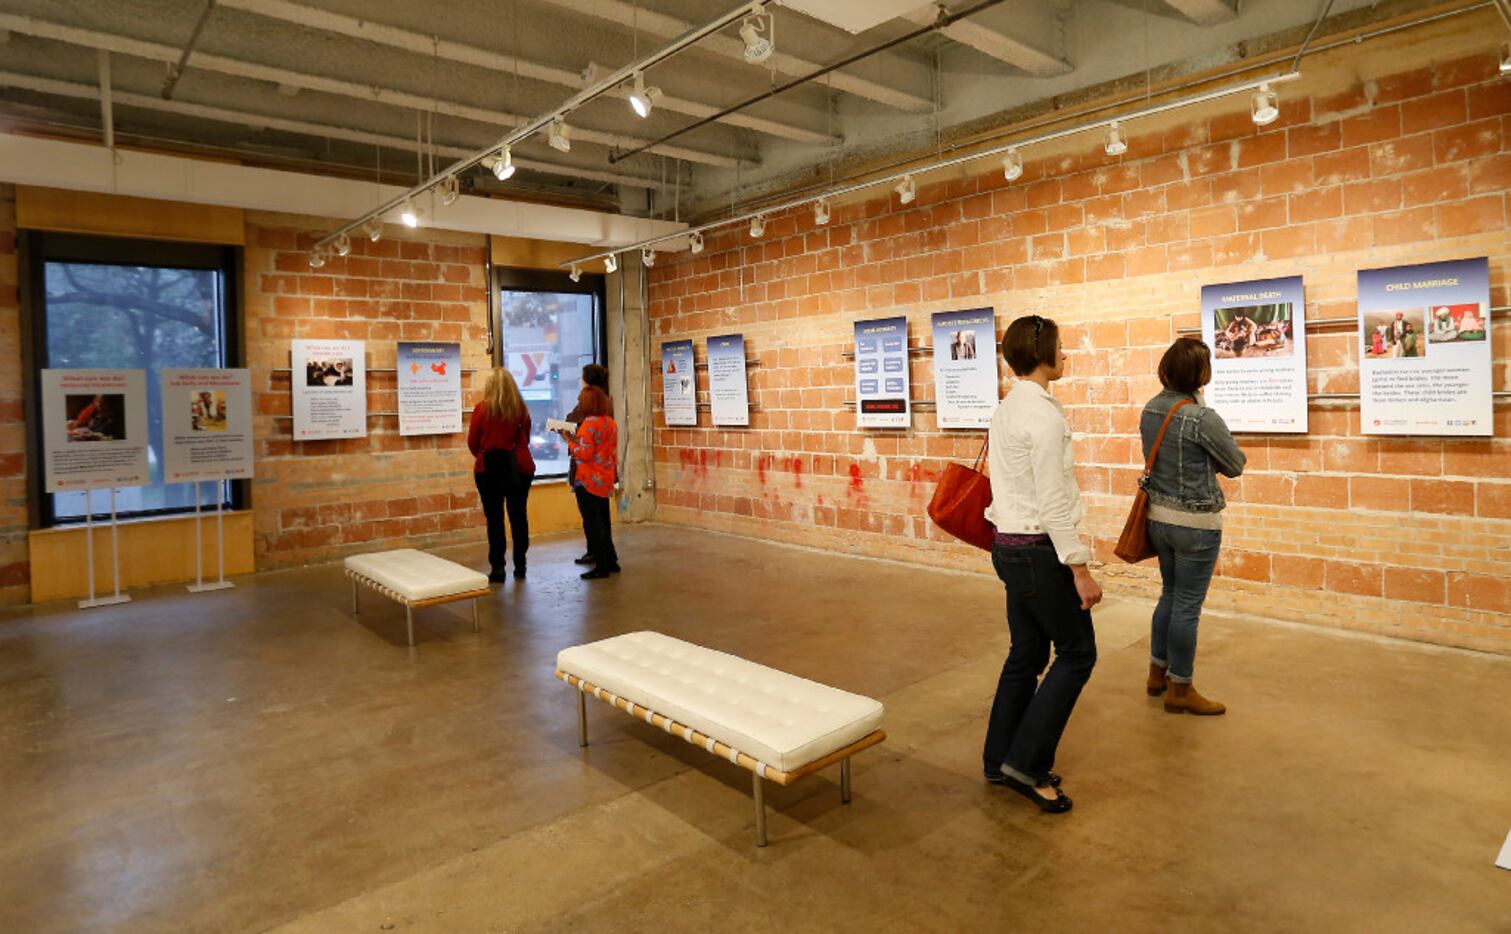 Visitors took in information at the exhibit on its opening day Friday. (Jae S. Lee/Staff...